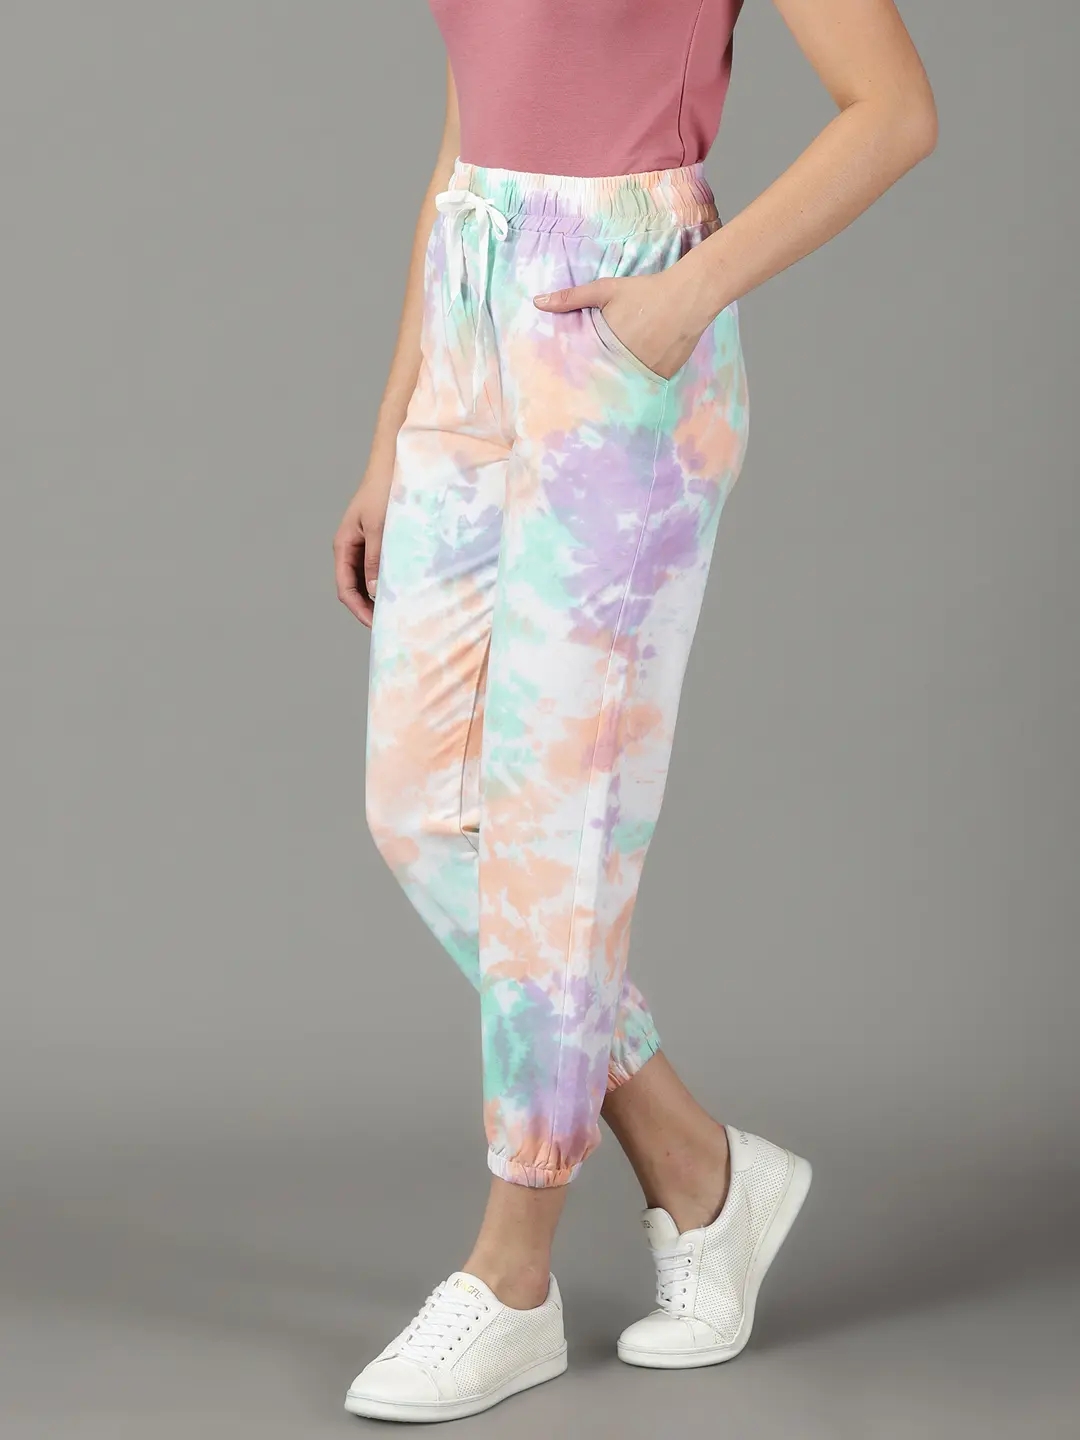 SHOWOFF Women's Tie and Dye Multi Regular Fit Track Pant